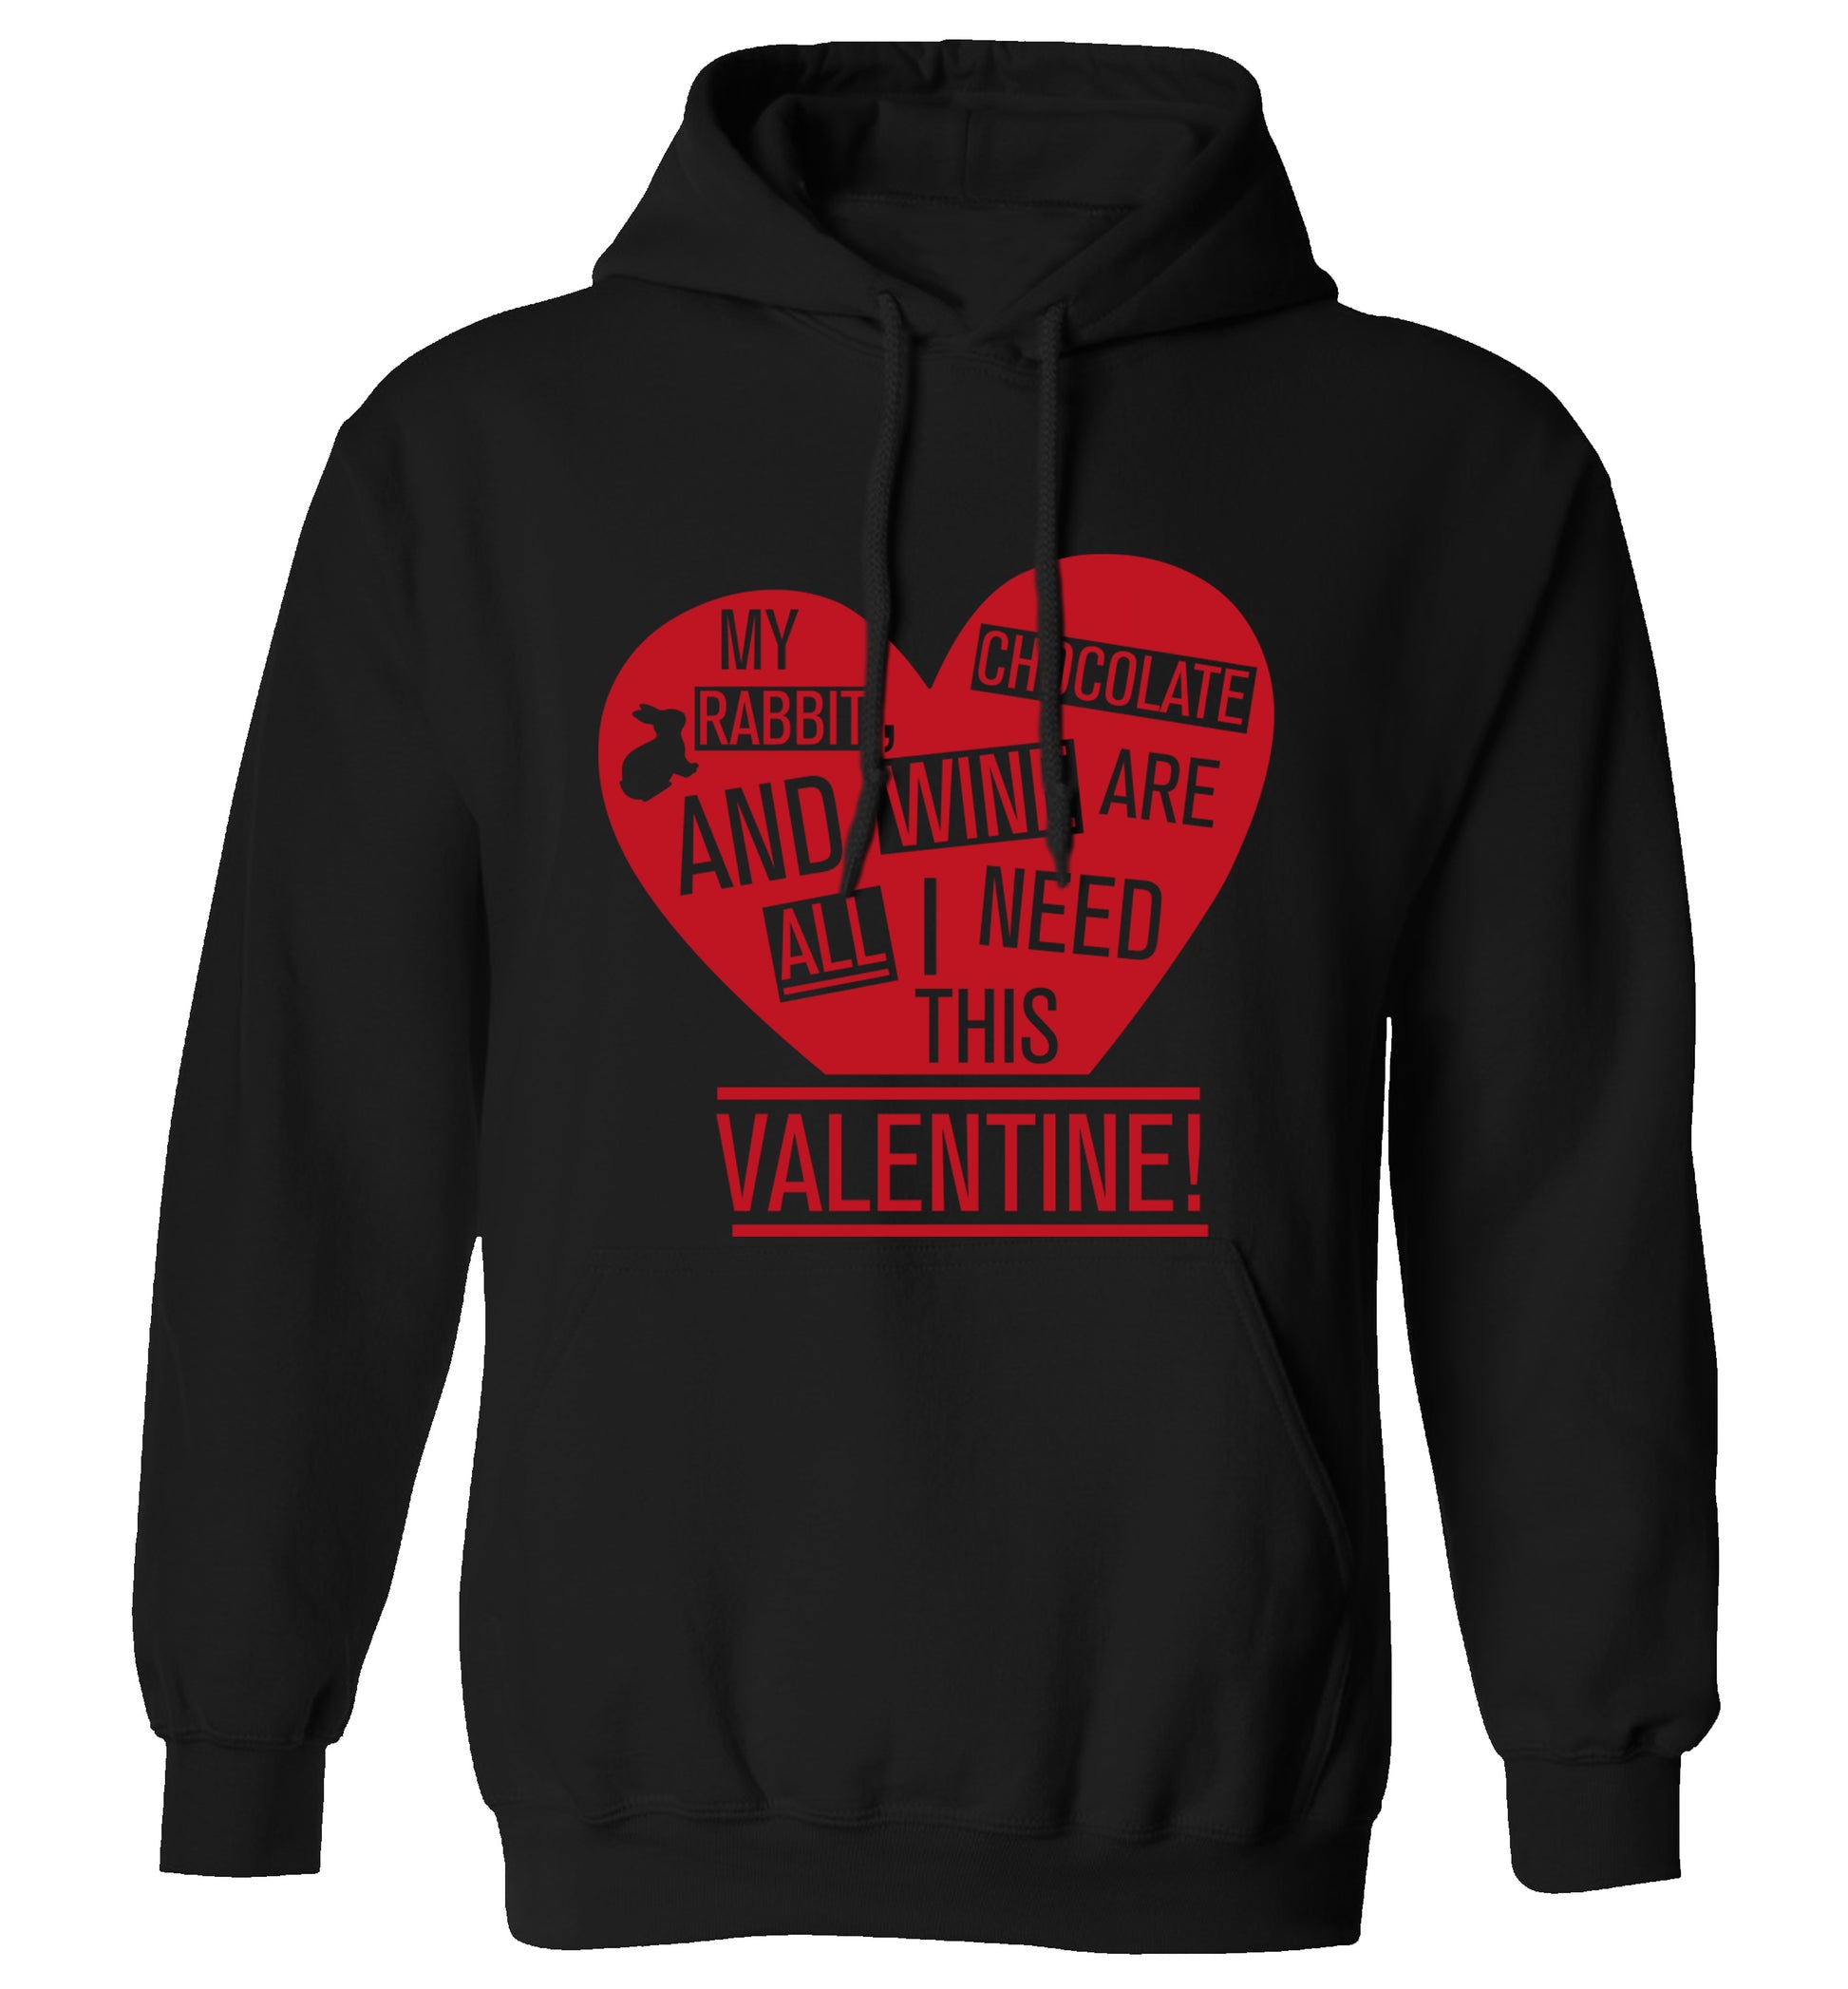 My rabbit, chocolate and wine are all I need this valentine! adults unisex black hoodie 2XL